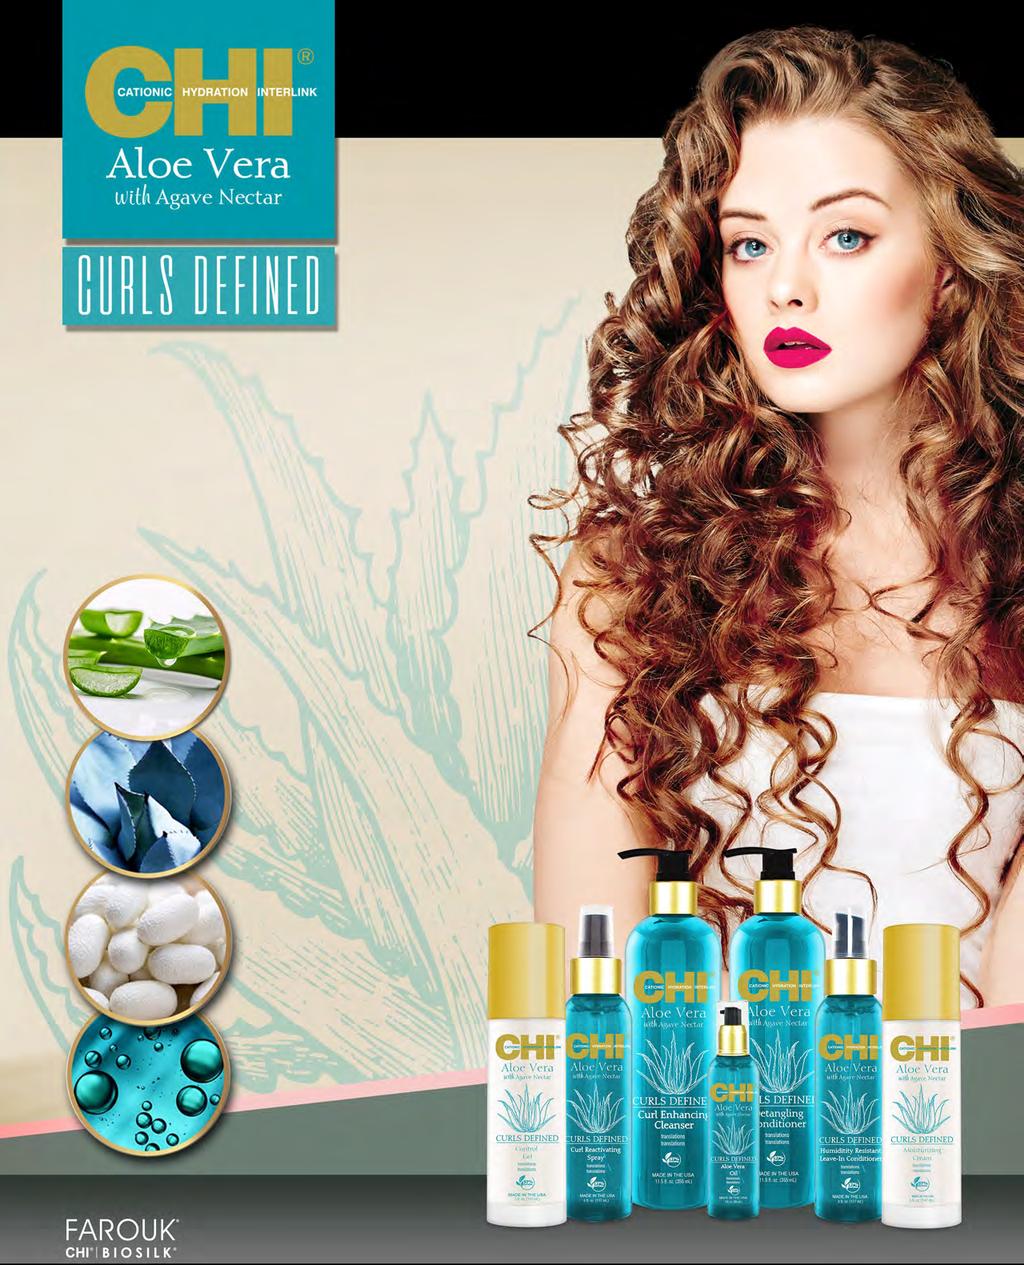 Define, enhance and revive curls and texture with CHI Aloe Vera.